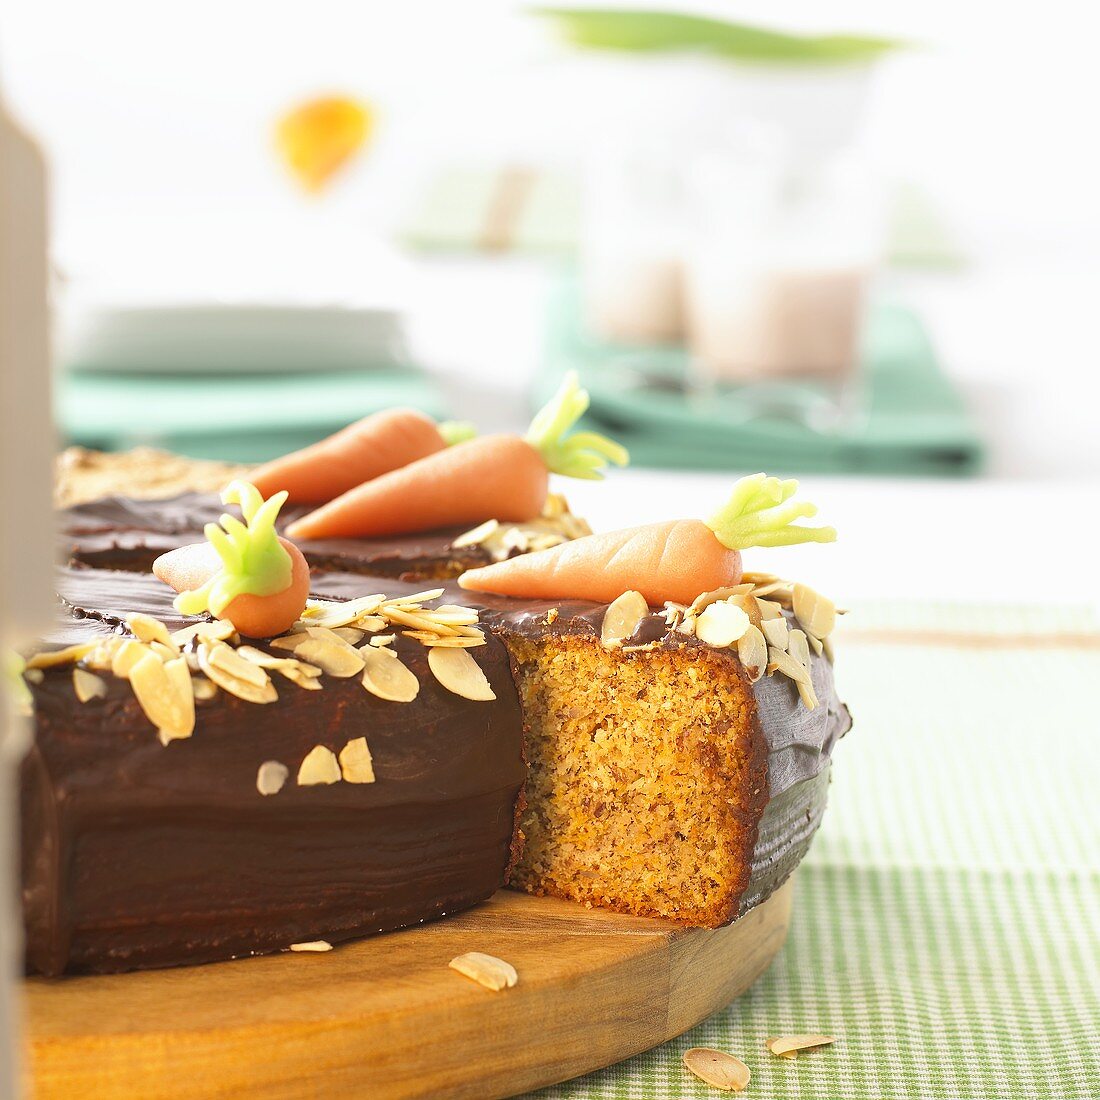 Carrot cake with marzipan carrots, a piece partly removed